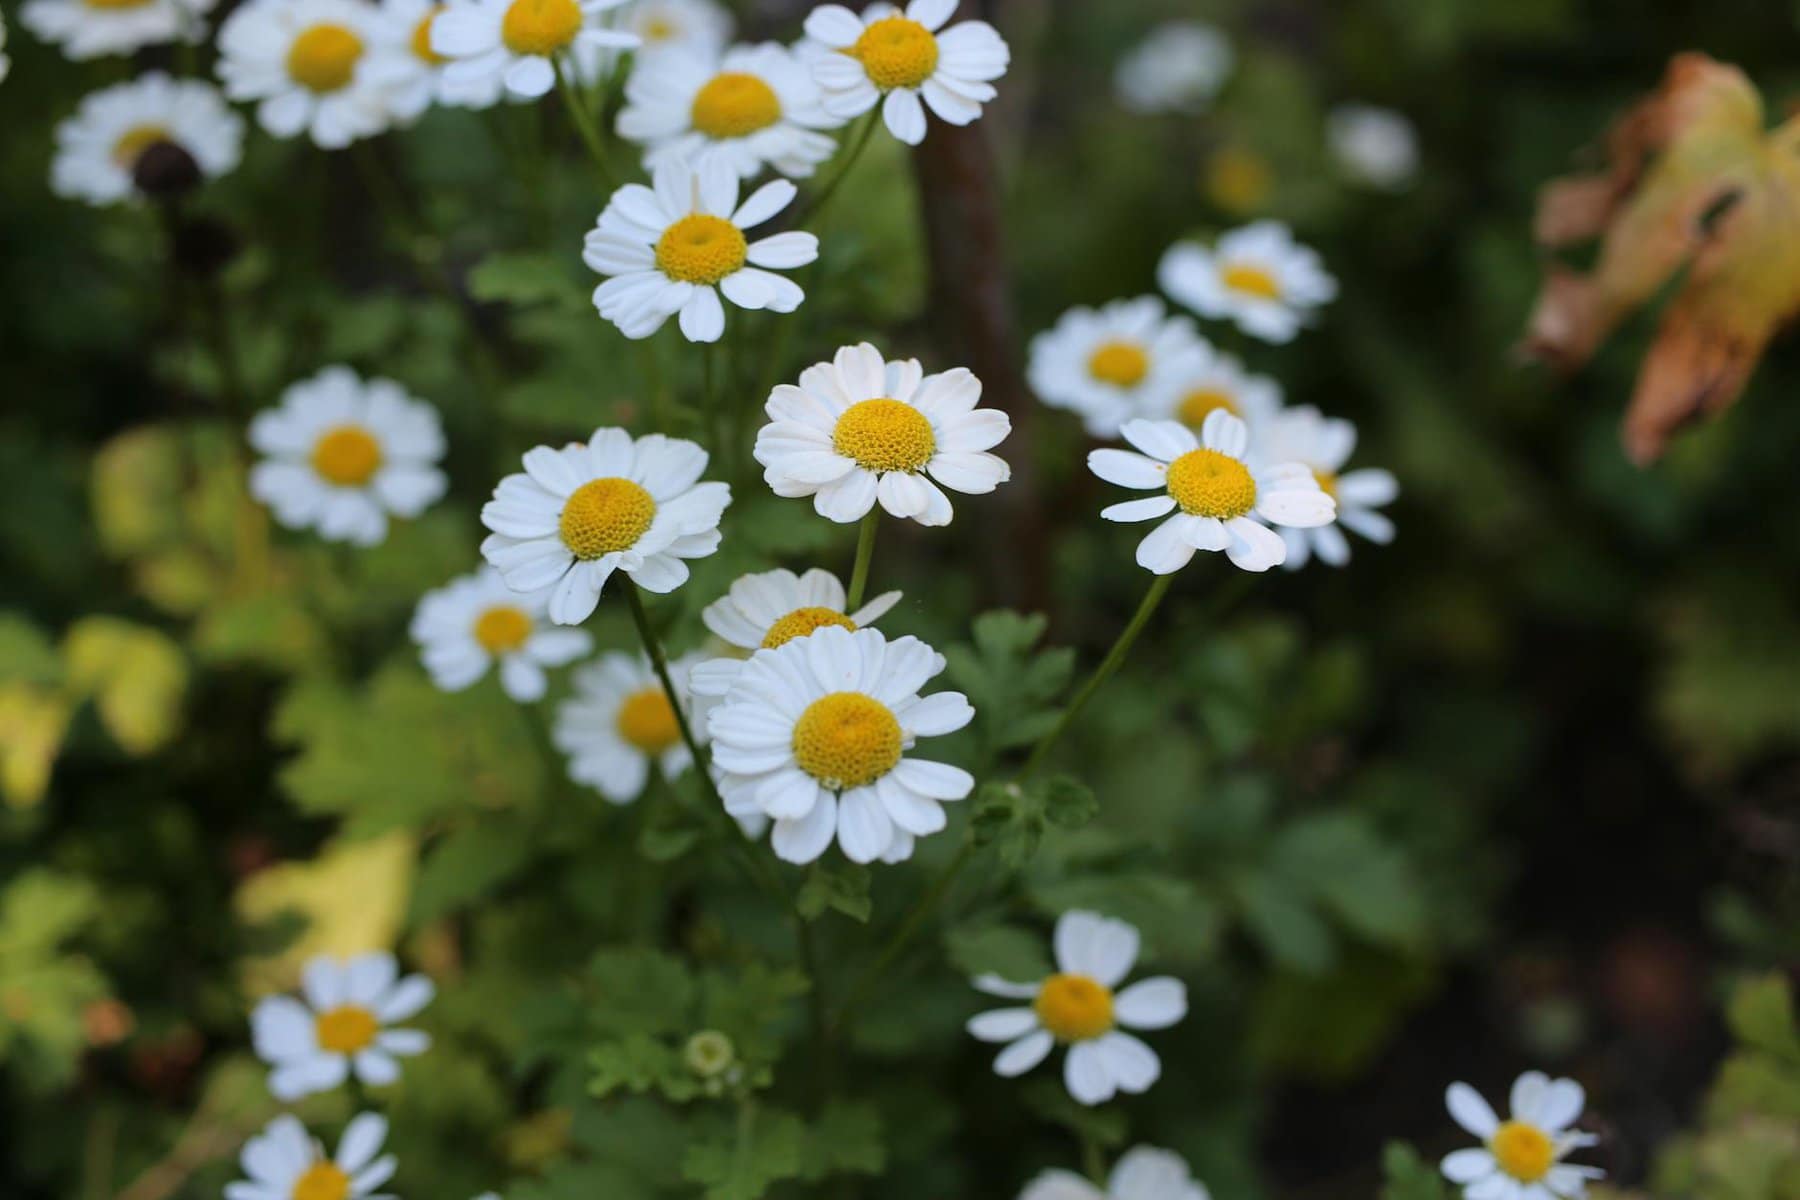 How Can Feverfew Potential Anti-cancer Properties Be Harnessed For Optimal Health?